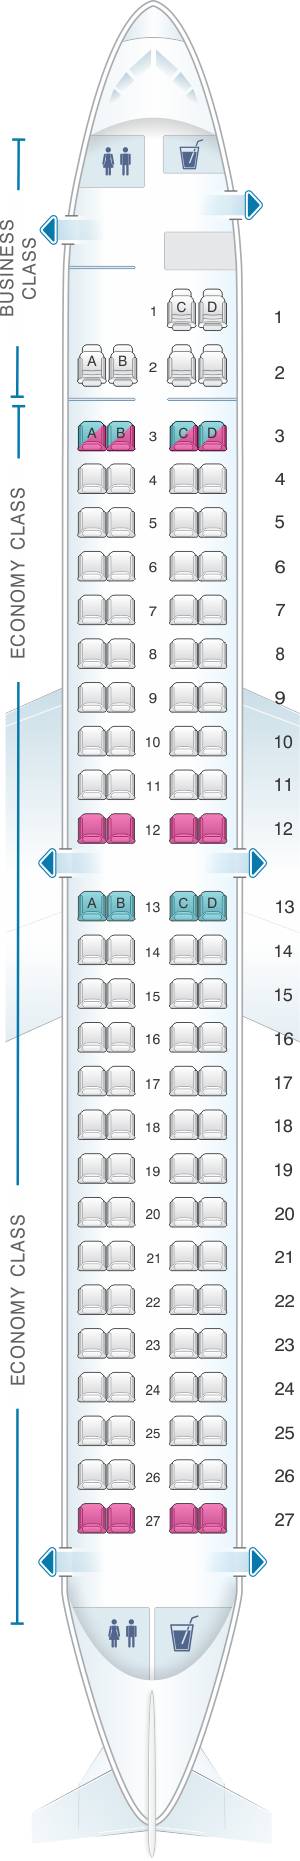 Seat map for TAP Air Portugal Embraer E190